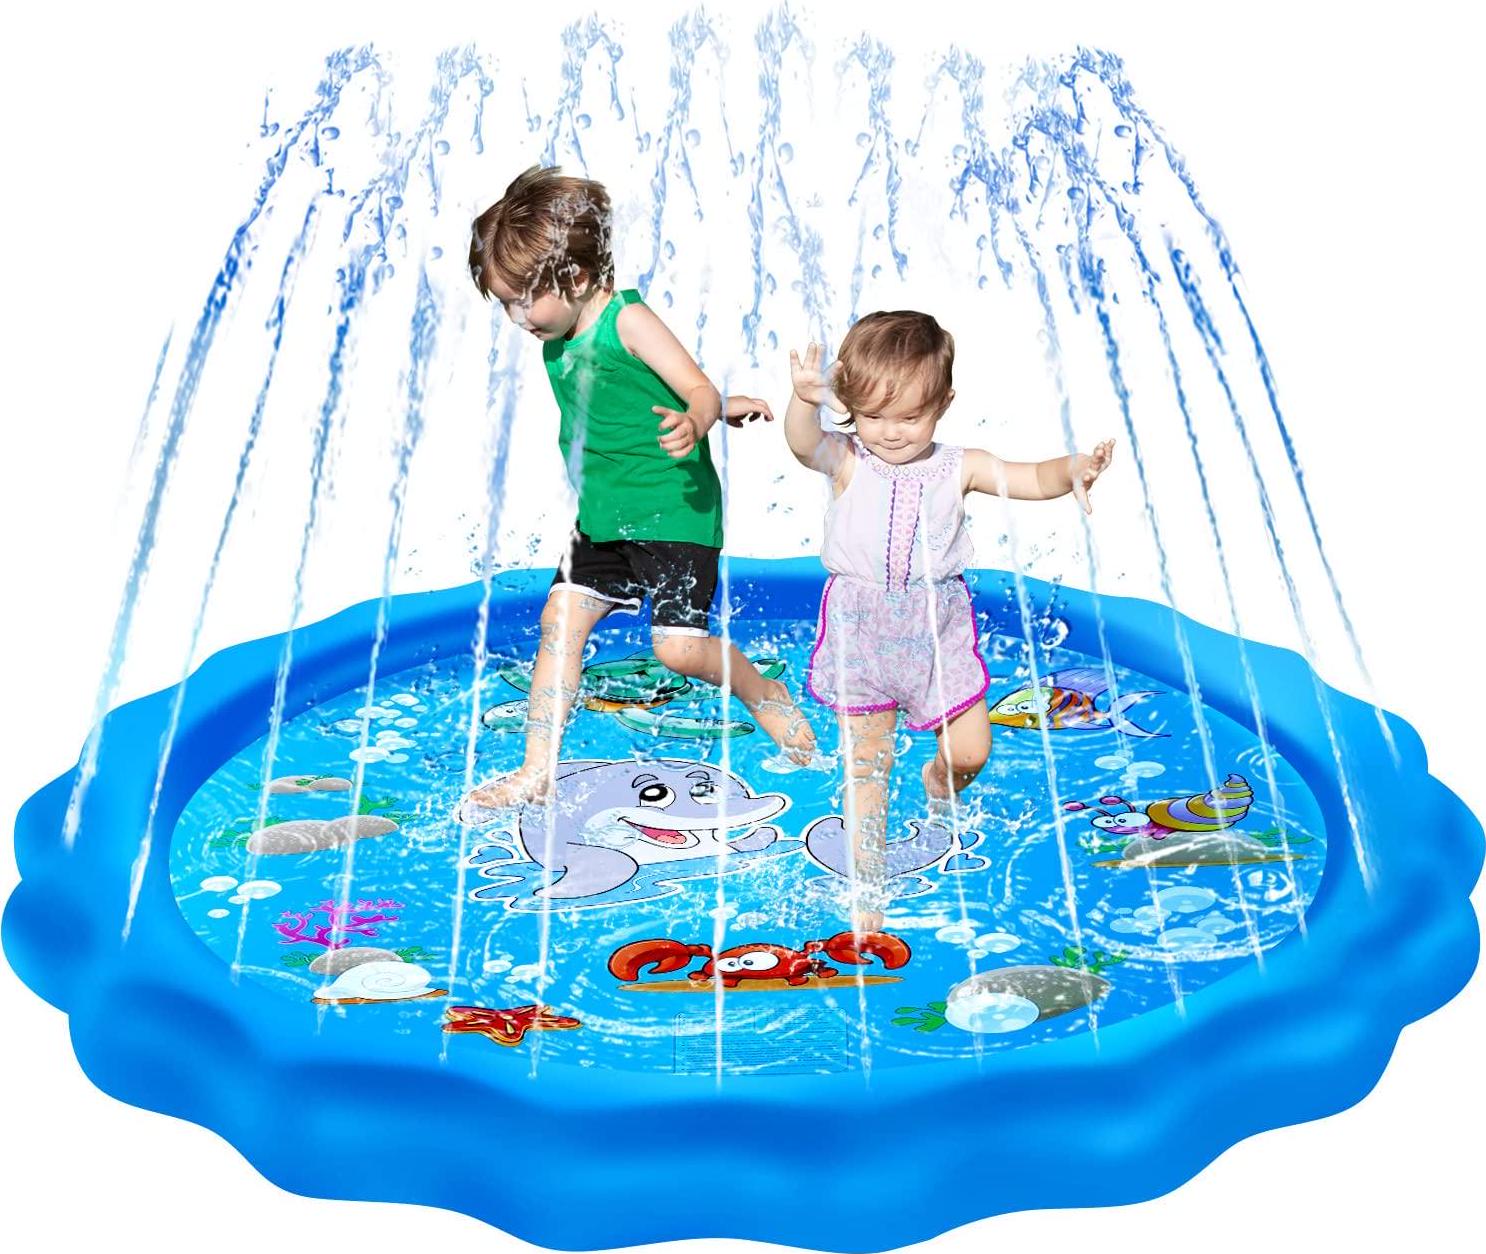 KINGSDRAGON, KingsDragon Splash Pad, 68 Sprinkler for Kids Outdoor Toys for Backyard, Play Mat Kiddie Baby Toddlers Swimming Pool Outside Water Toys Gifts for Age 1-12 Year Old Boy Girl